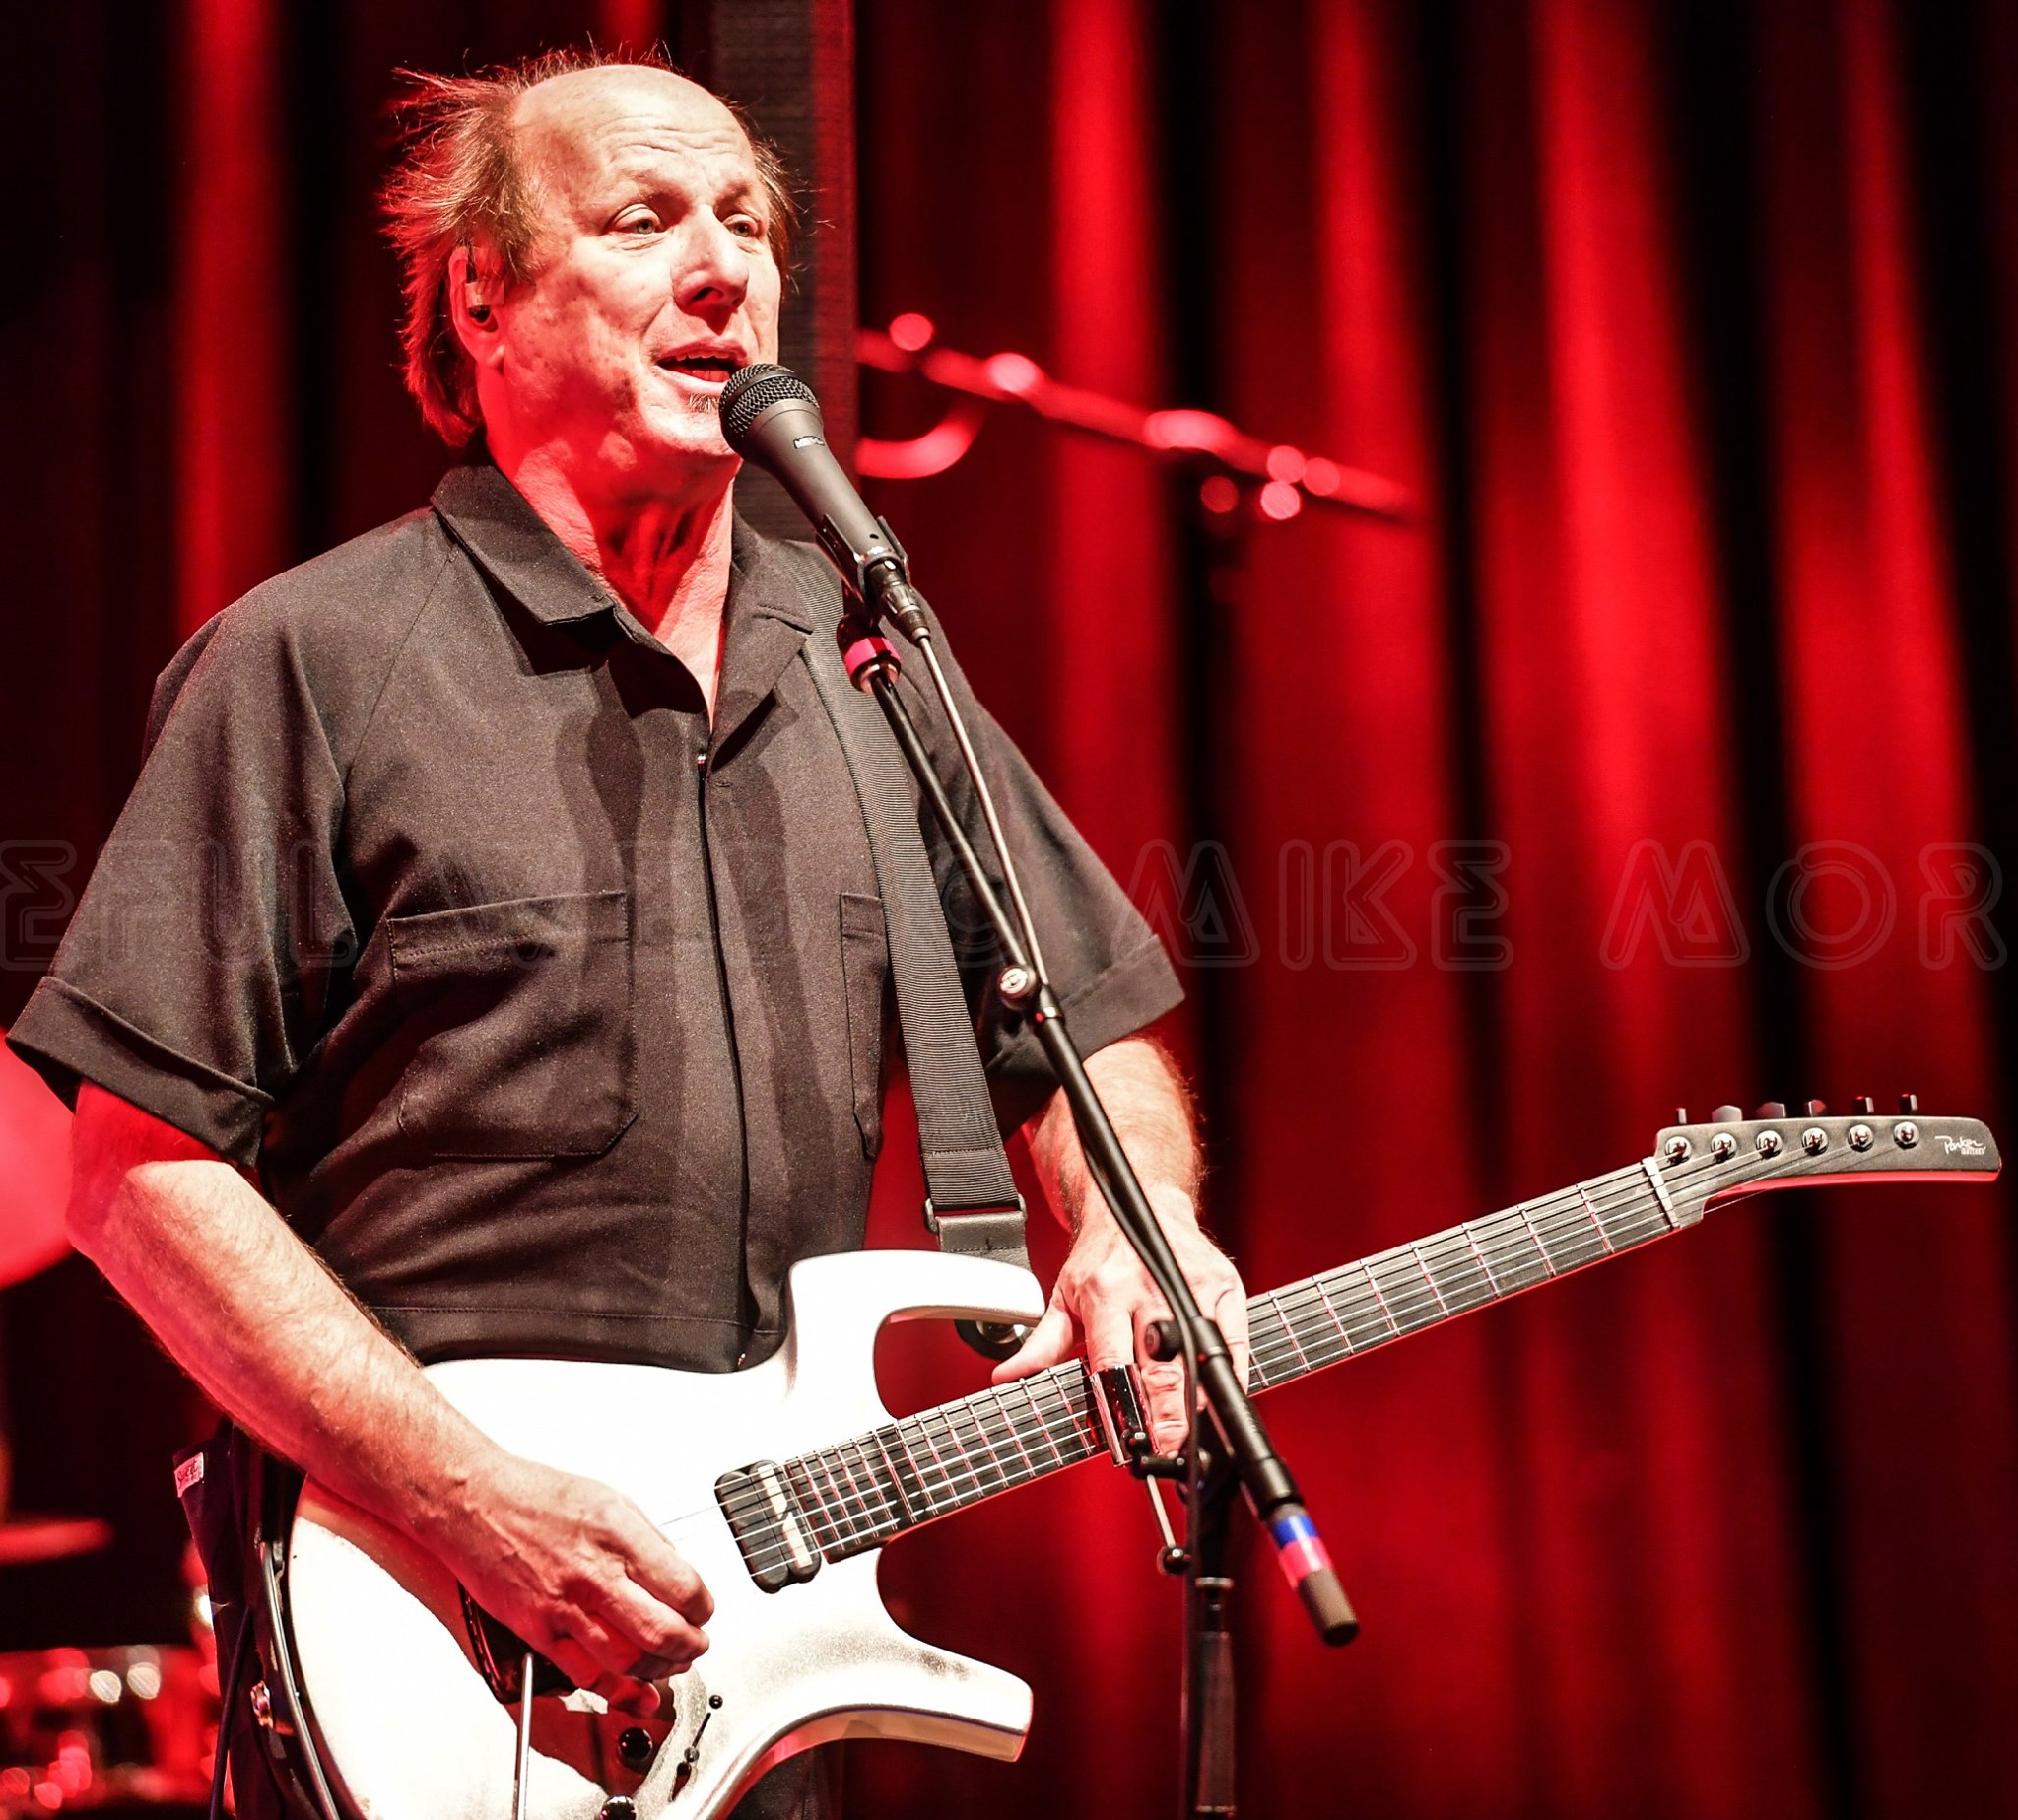 Adrian Belew In Conjunction With US Summer Tour Releases His First Solo Digital Album “Elevator”